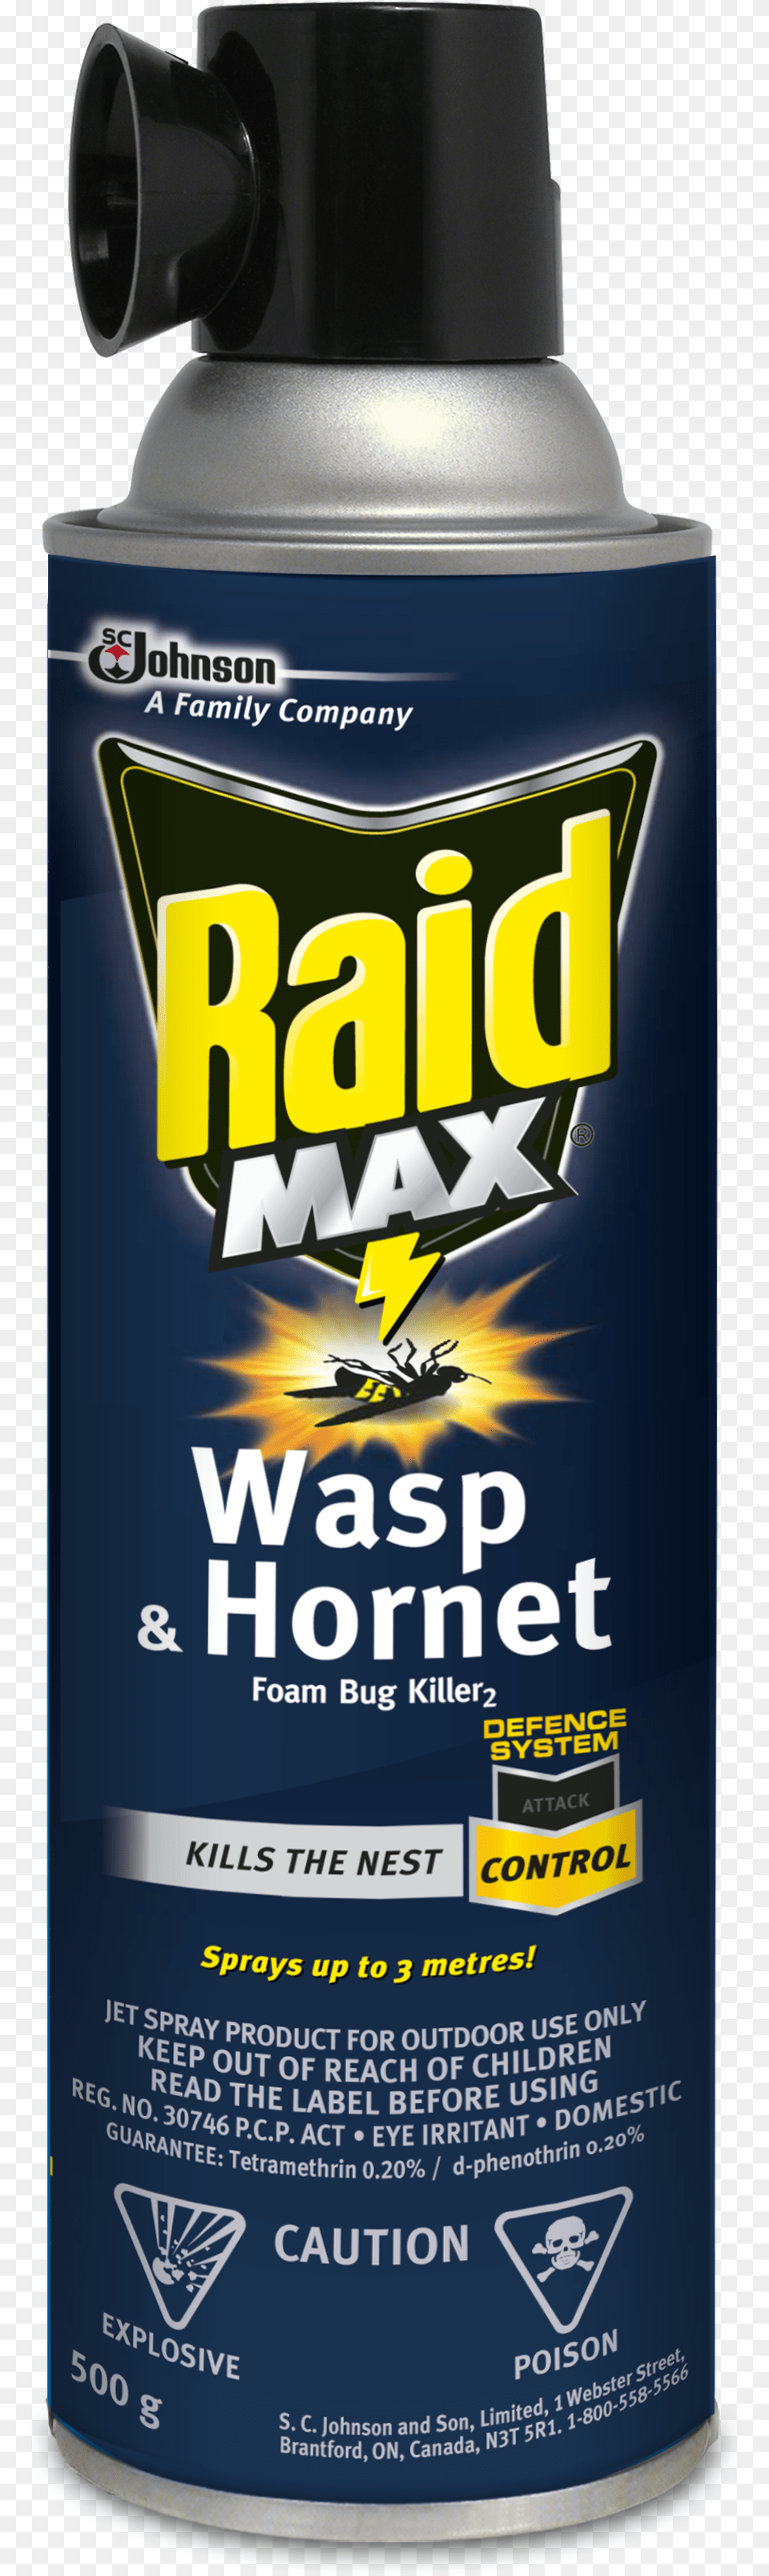 Raid Max Wasp Amp Hornet Foam Bug Killer Raid Max Wasp And Hornet, Tin, Can, Spray Can, Bottle Free Transparent Png